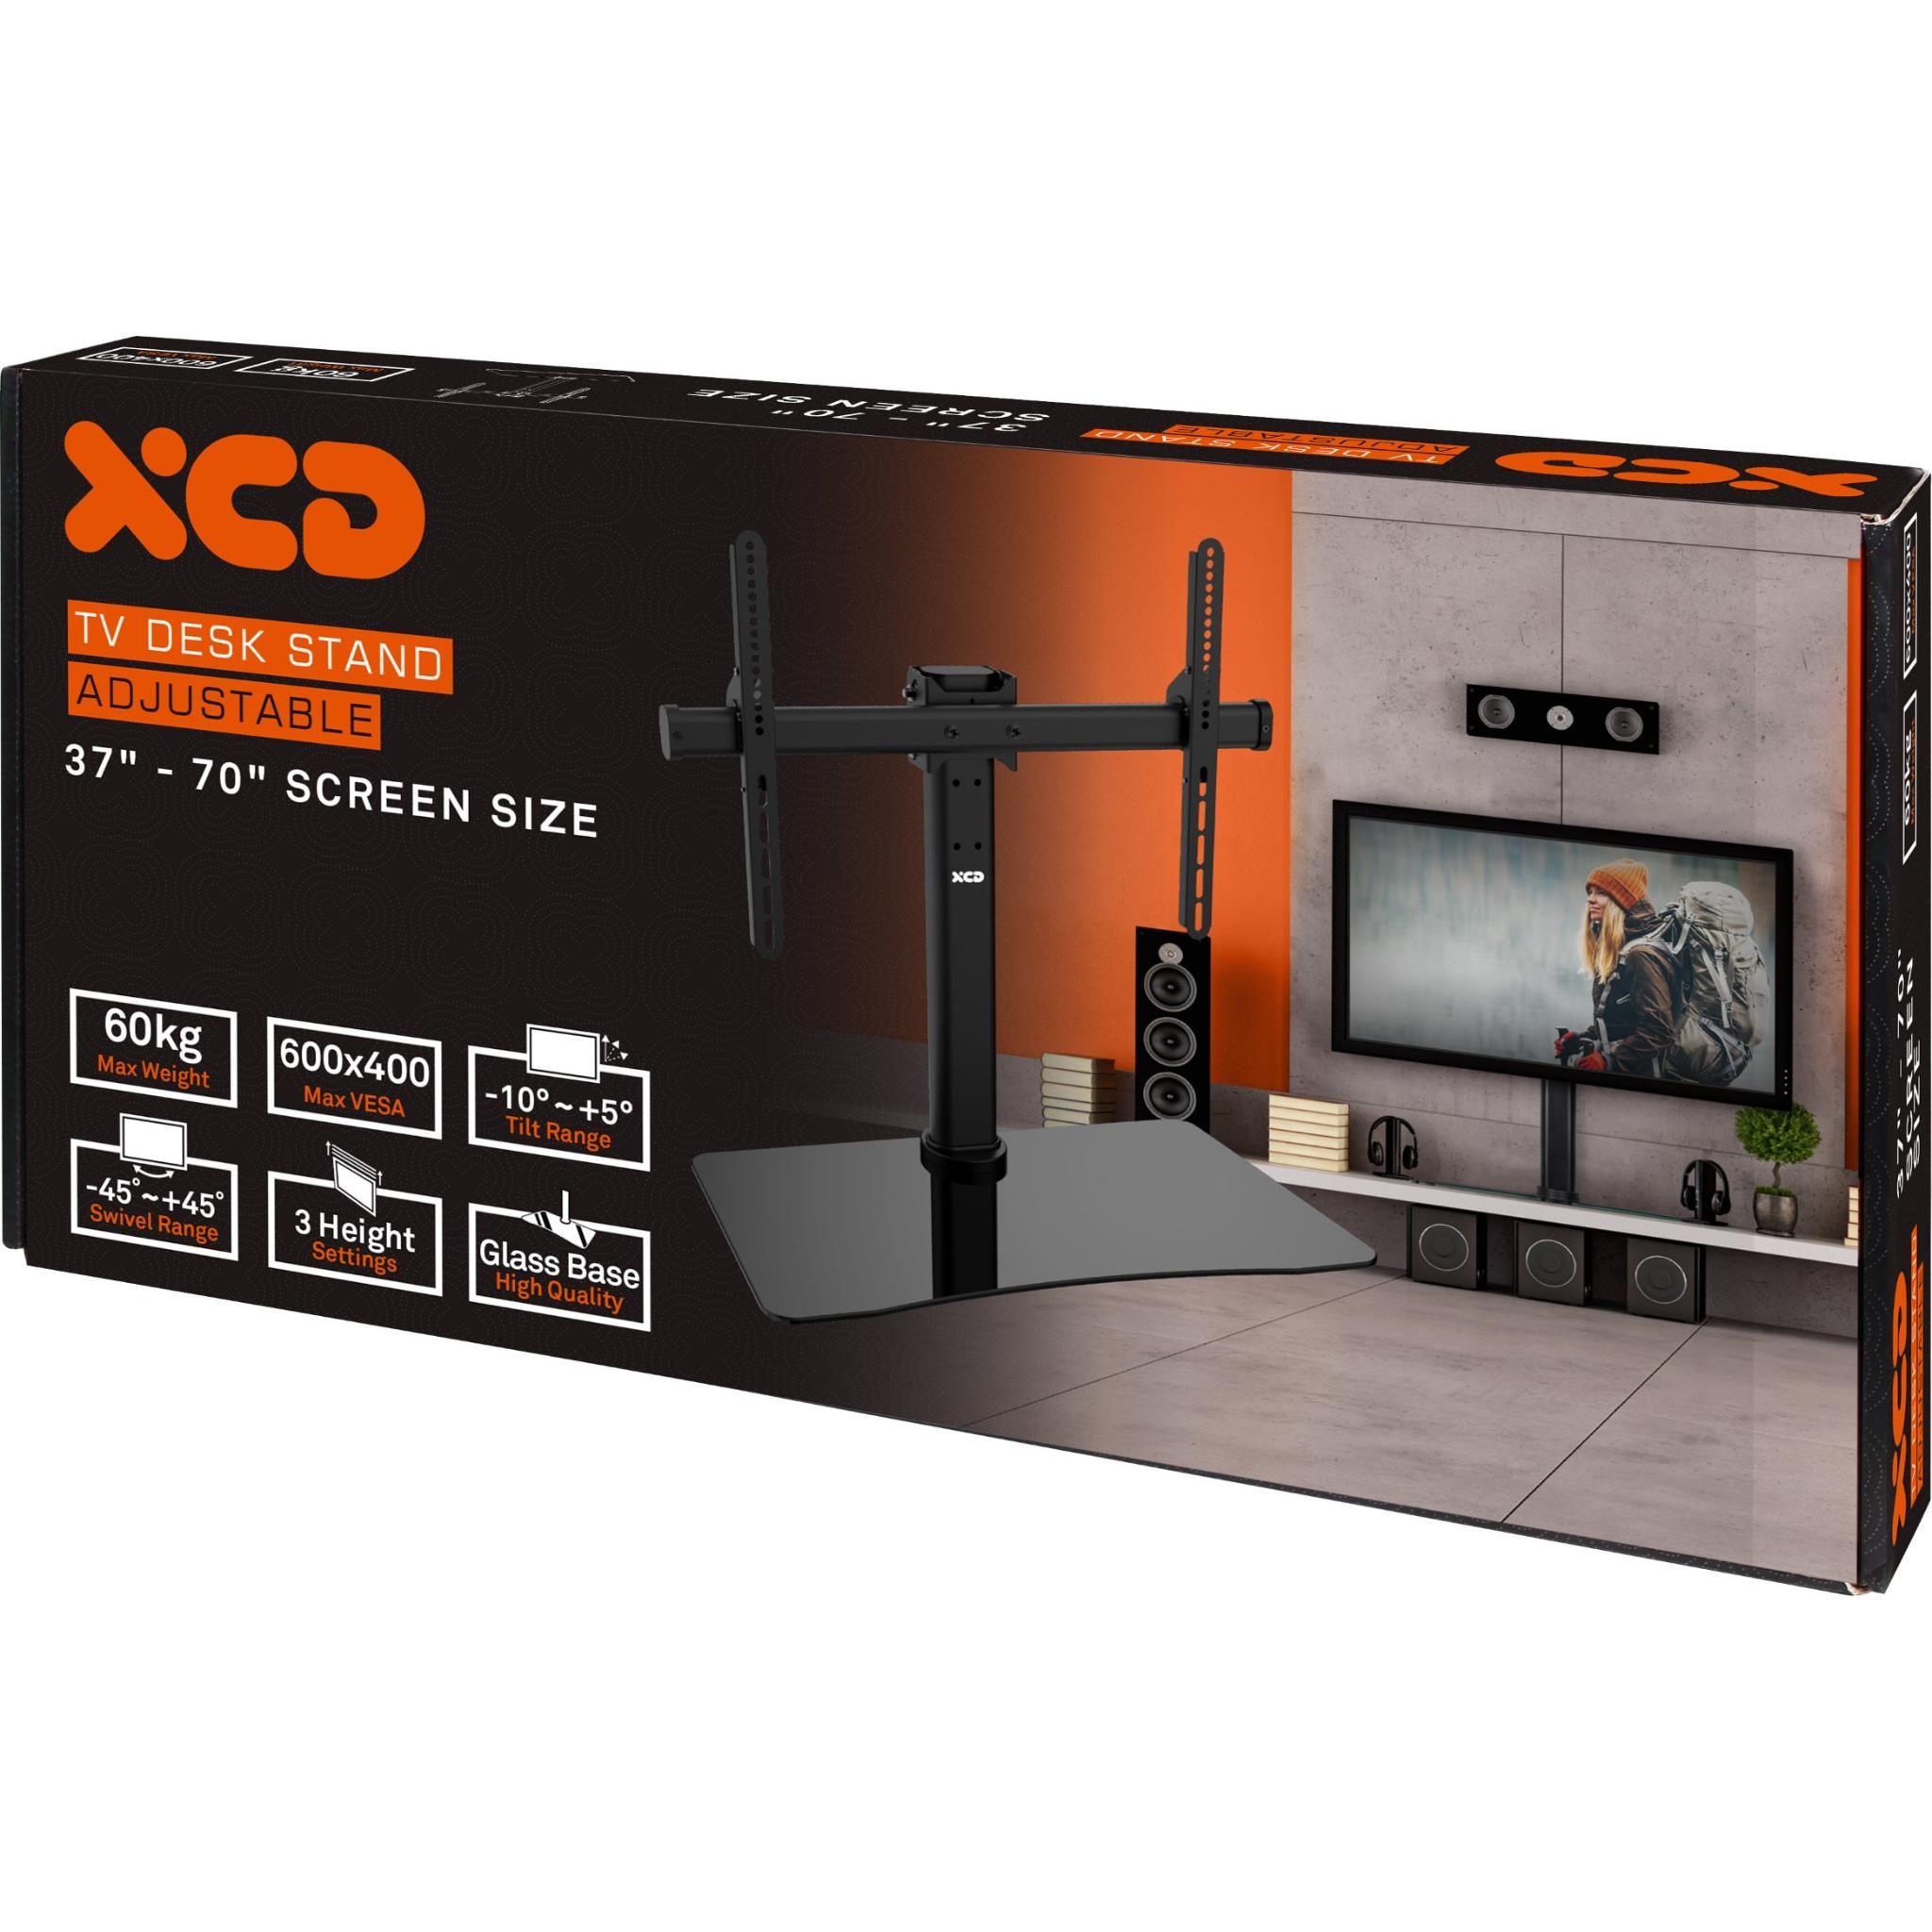 Xcd Adjustable Tv Desk Stand (37" 70") – Jb Hi Fi Pertaining To Foldable Portable Adjustable Tv Stands (View 10 of 15)